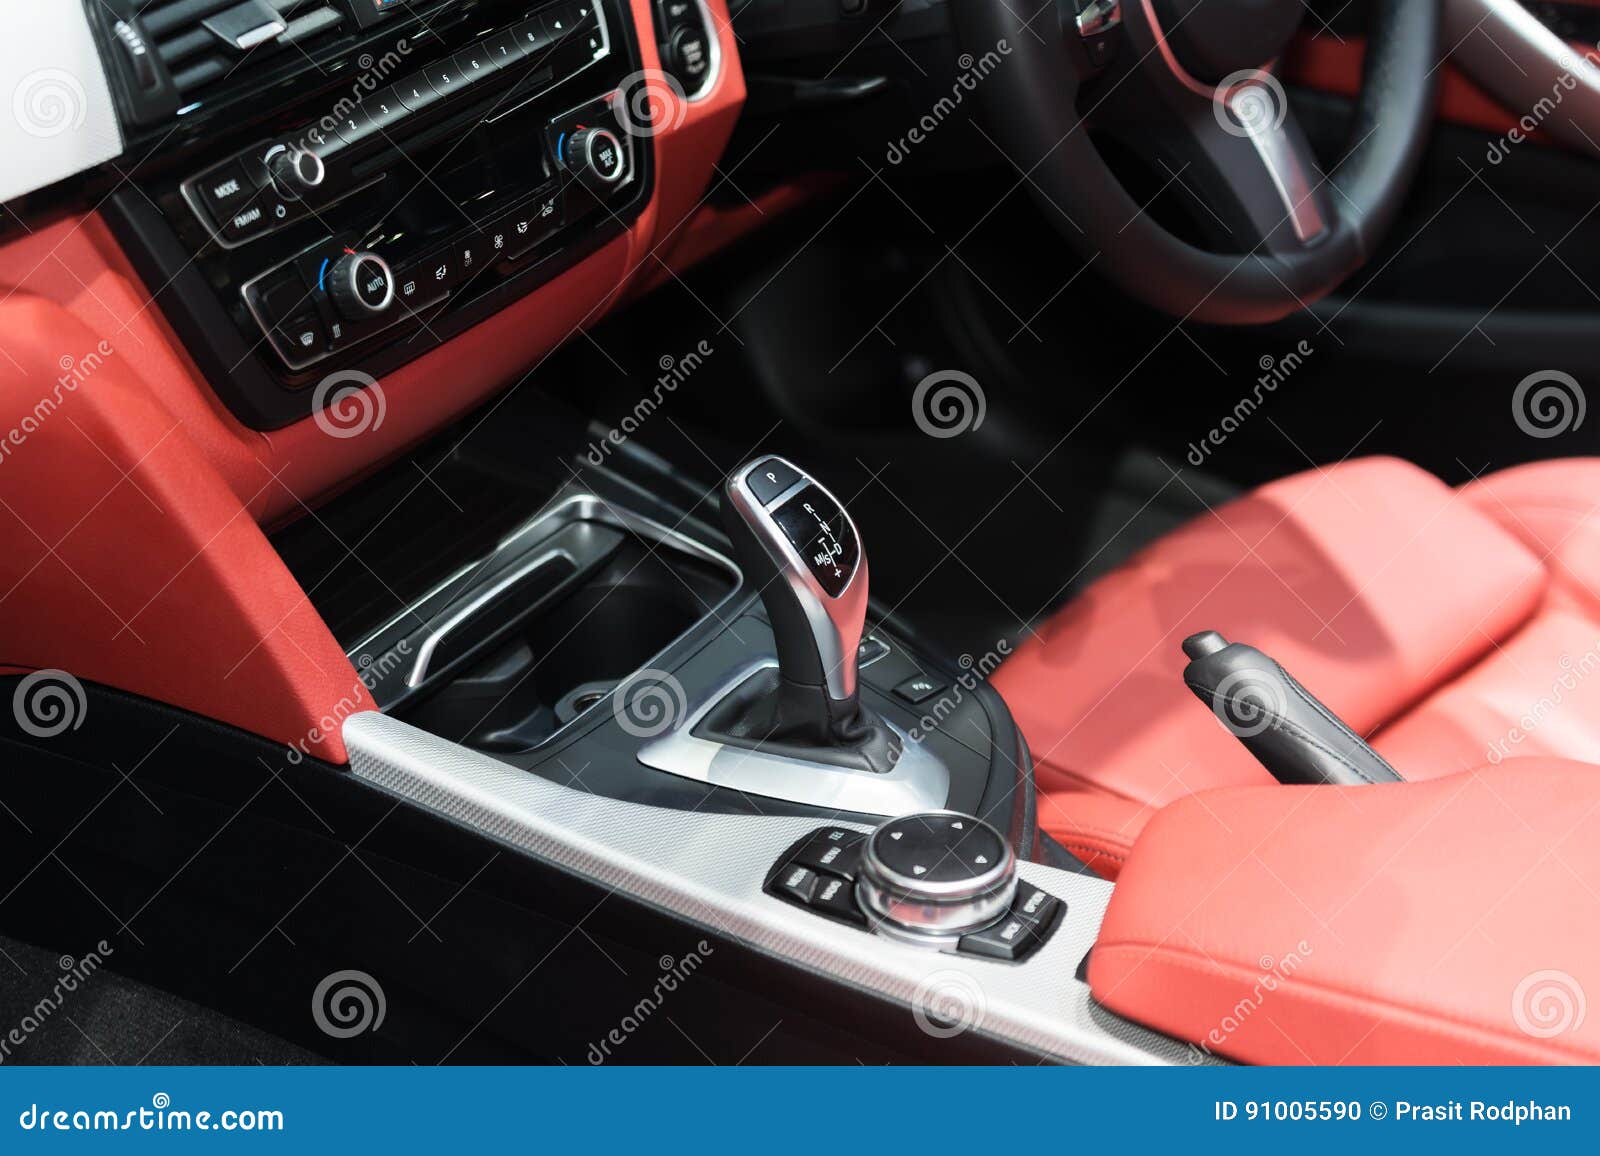 Red Luxury Car Interior With Steering Wheel Shift Lever And